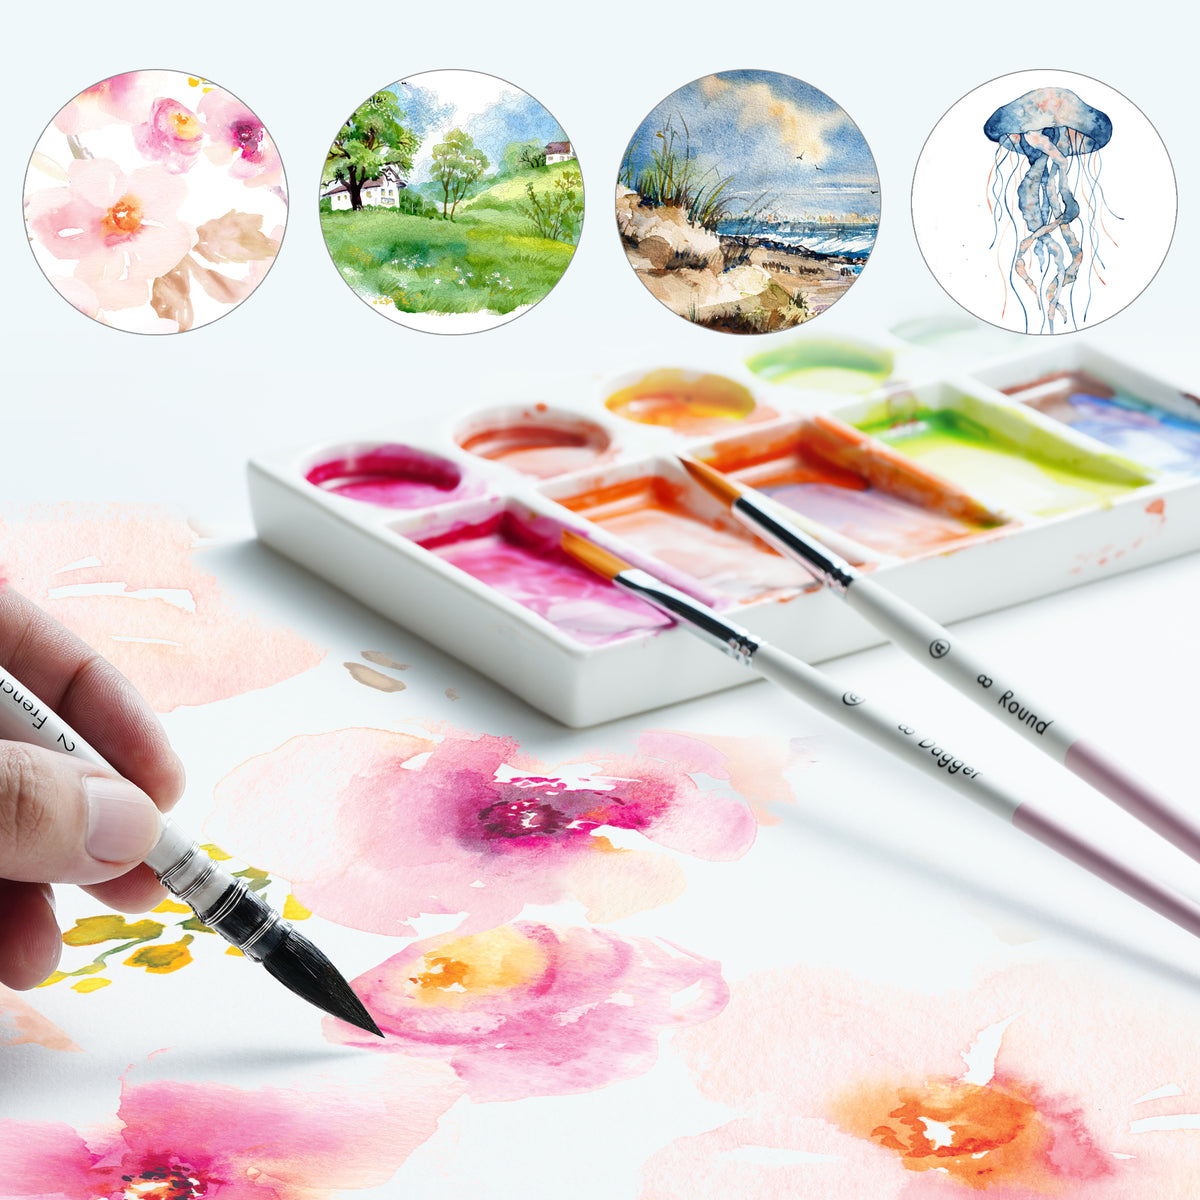 Travel Brushes Archives - High quality artists paint, watercolor